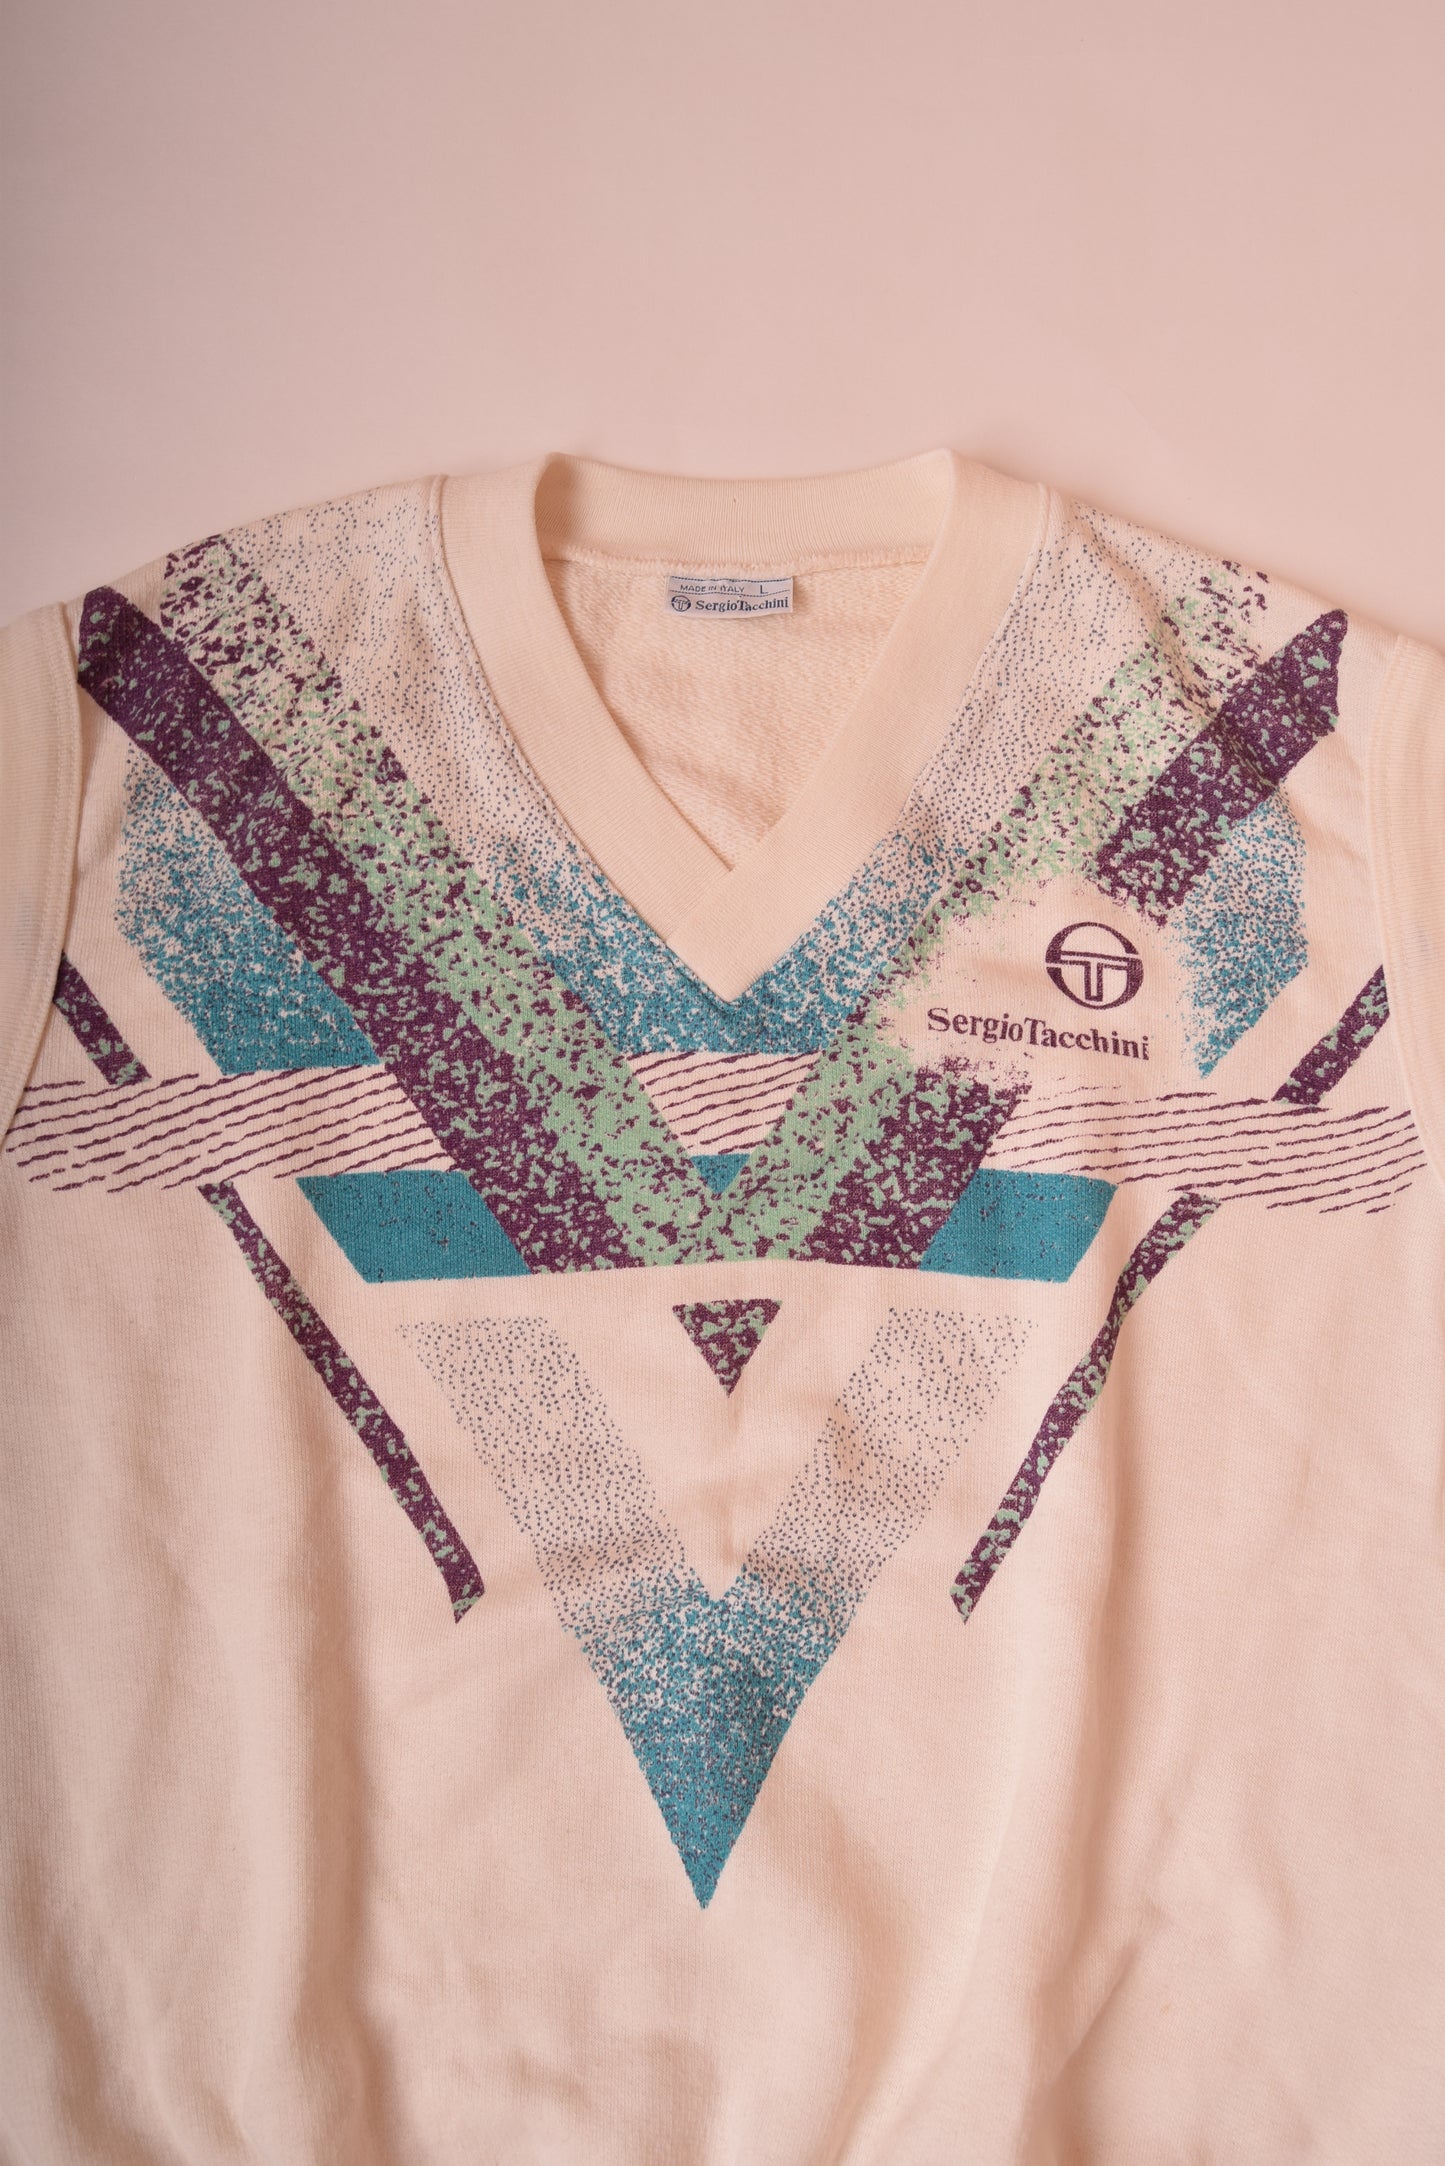 Vintage 80's Sergio Tacchini Tennis Vest Size L Made in Italy